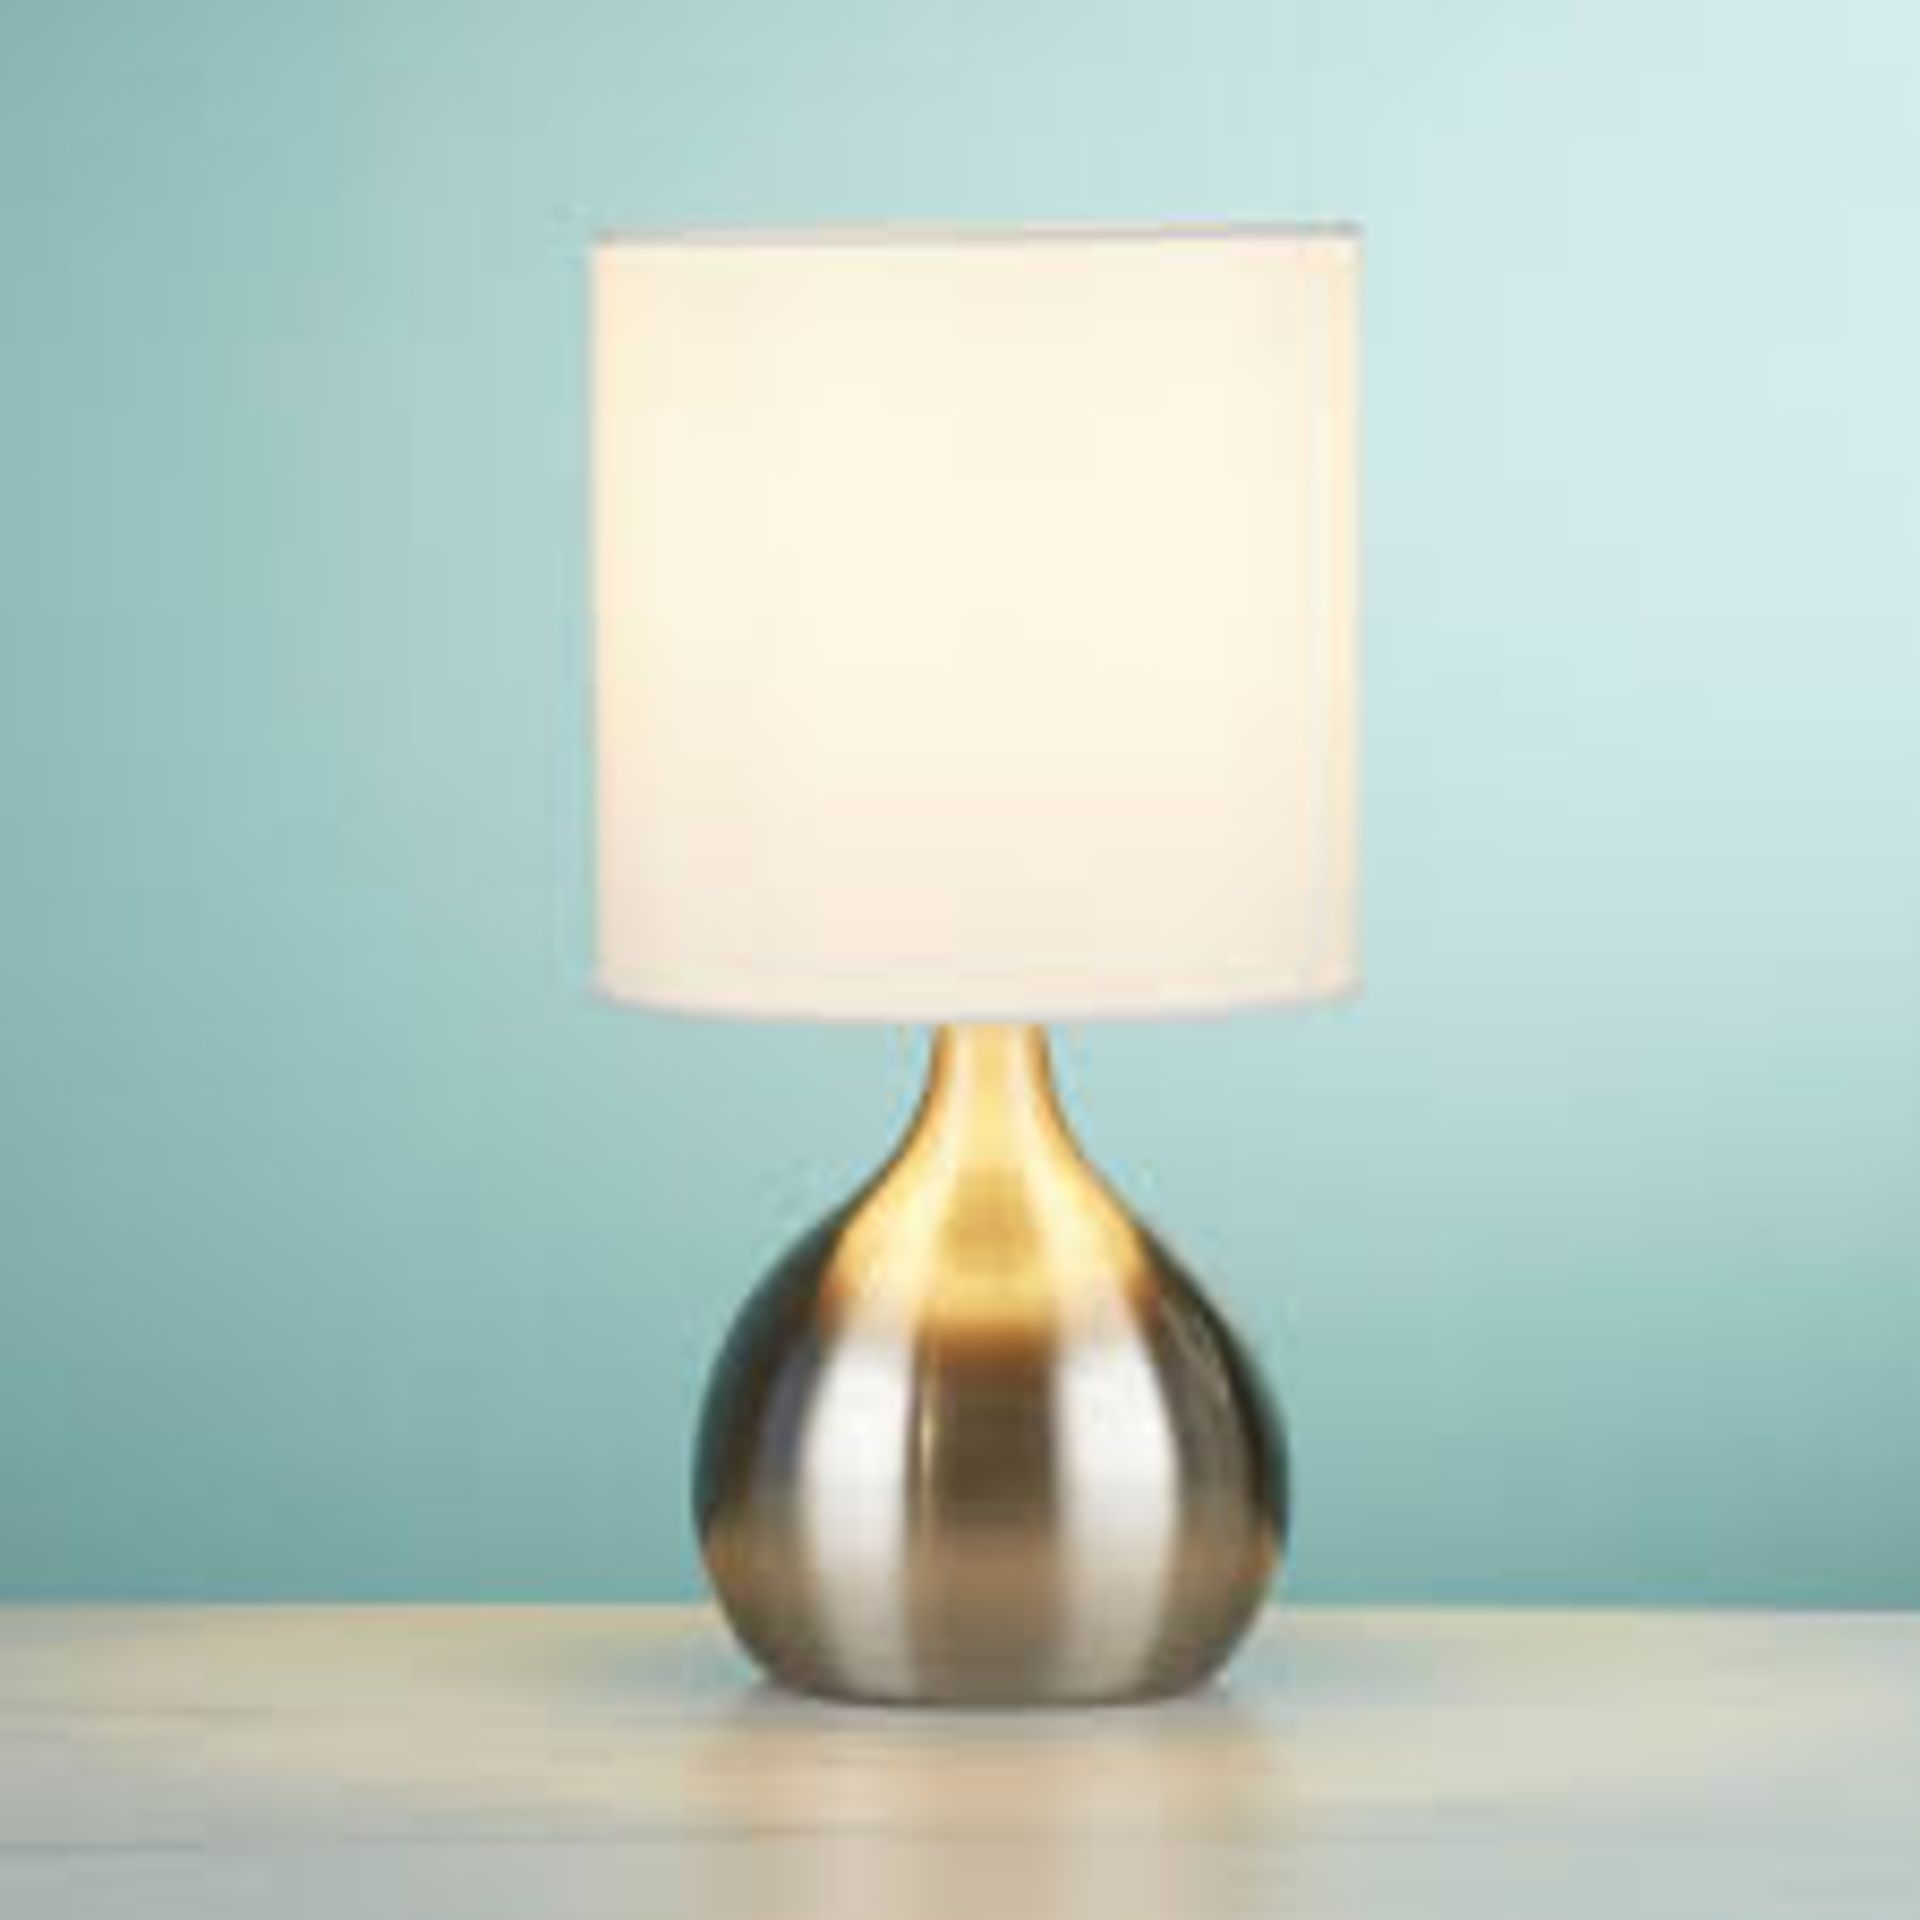 1 x Searchlight Touch Table Lamp in satin silver - Ref: 3923SS - New and Boxed Stock - Image 3 of 4